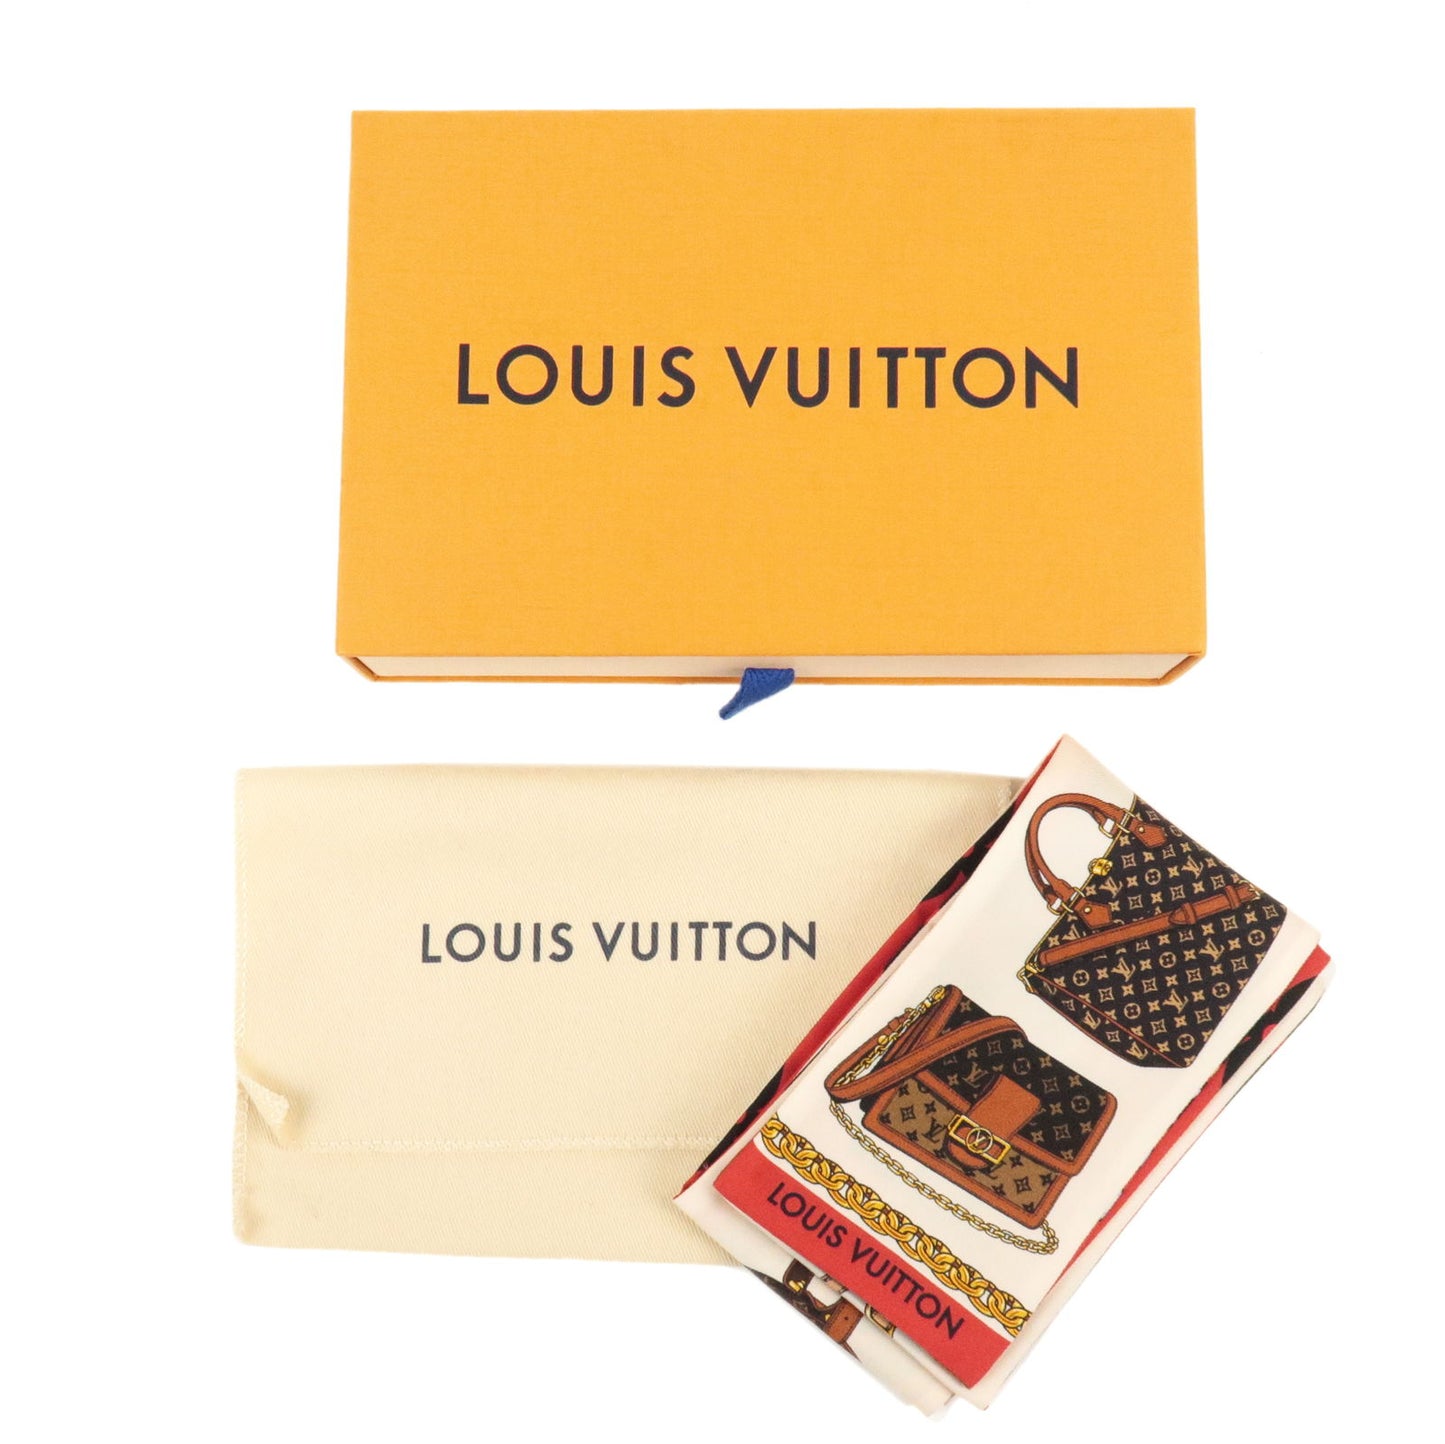 M76645 – Could 's Michael Jackson - Inspired Collection Spell Trouble for Louis  Vuitton - to - Silk - Bandeau - 100% - Preis für Second Hand Taschen Louis  Vuitton Pegase - Twilly - Scarf - Louis - Tribute - Vuitton